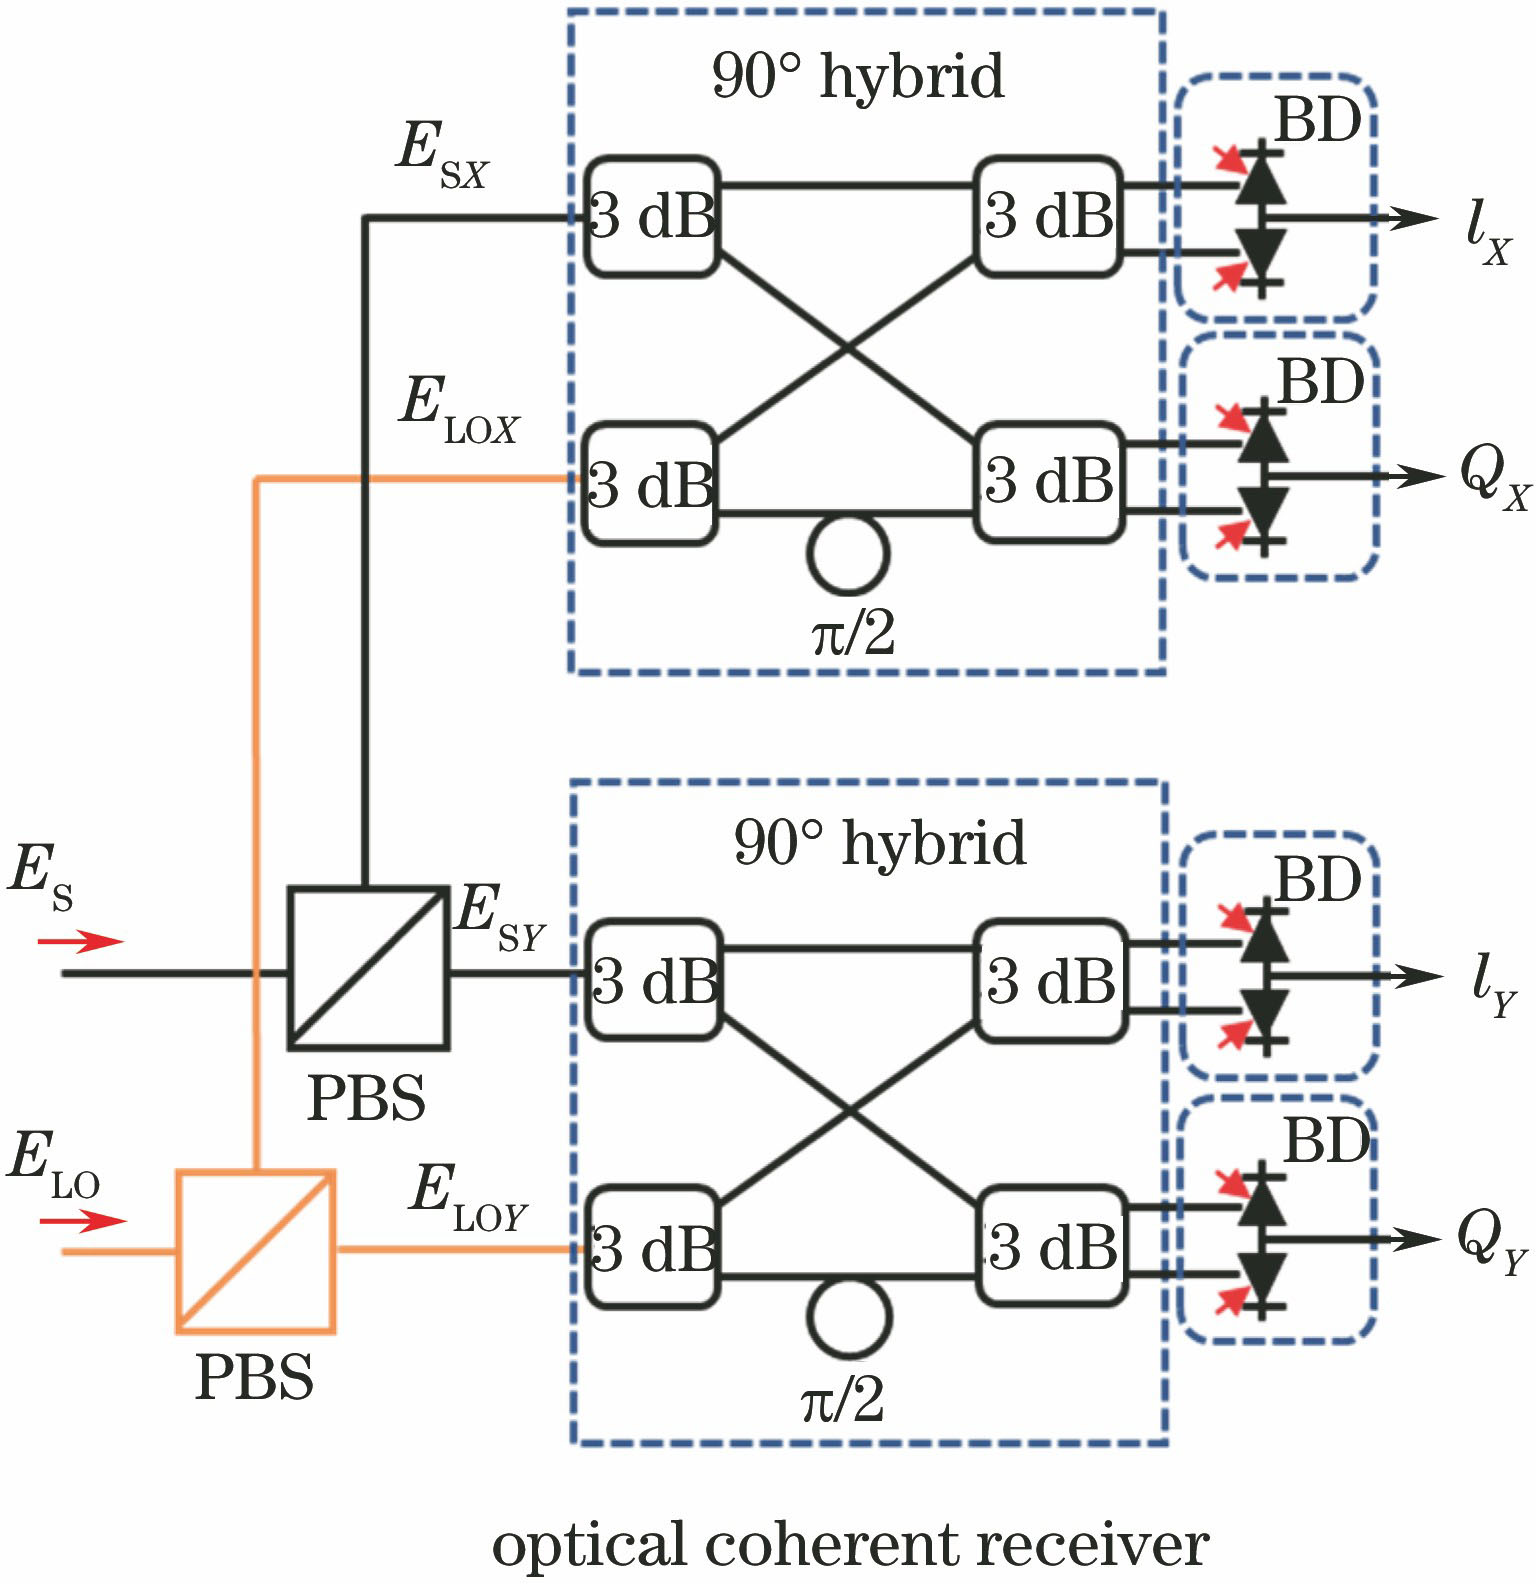 Structure schematic of optical coherent receiver